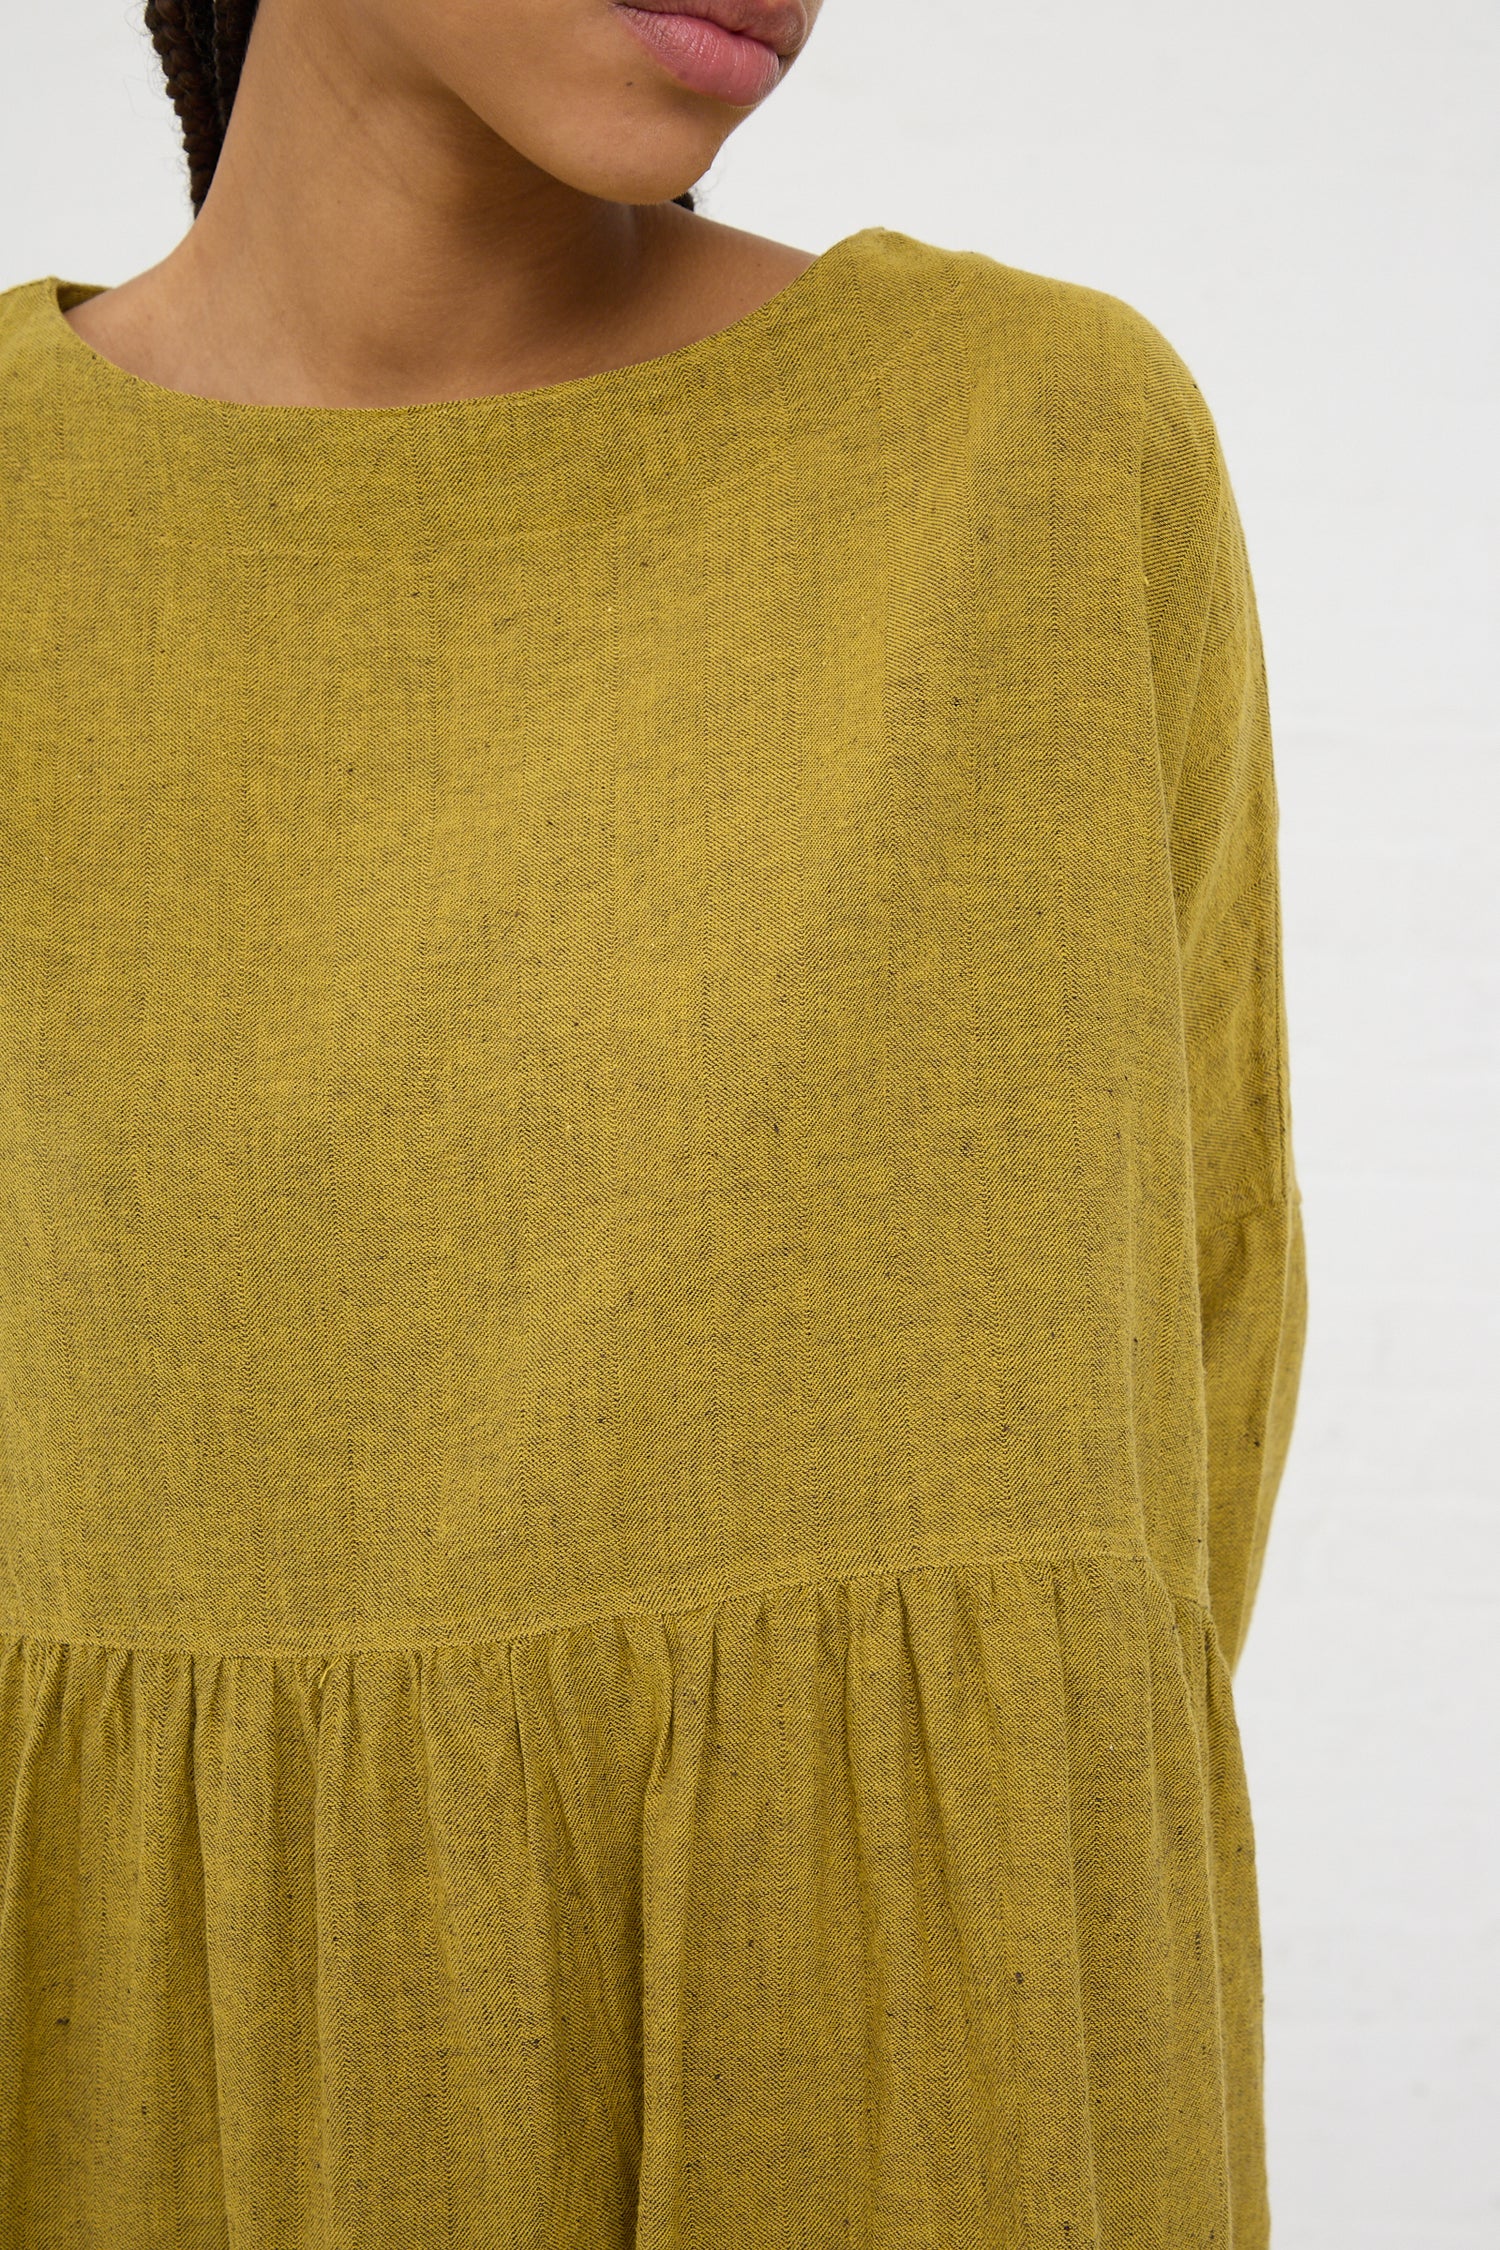 Close-up of a person wearing an Ichi Antiquités Linen Cotton Herringbone Dress in Yellow with a round neckline.